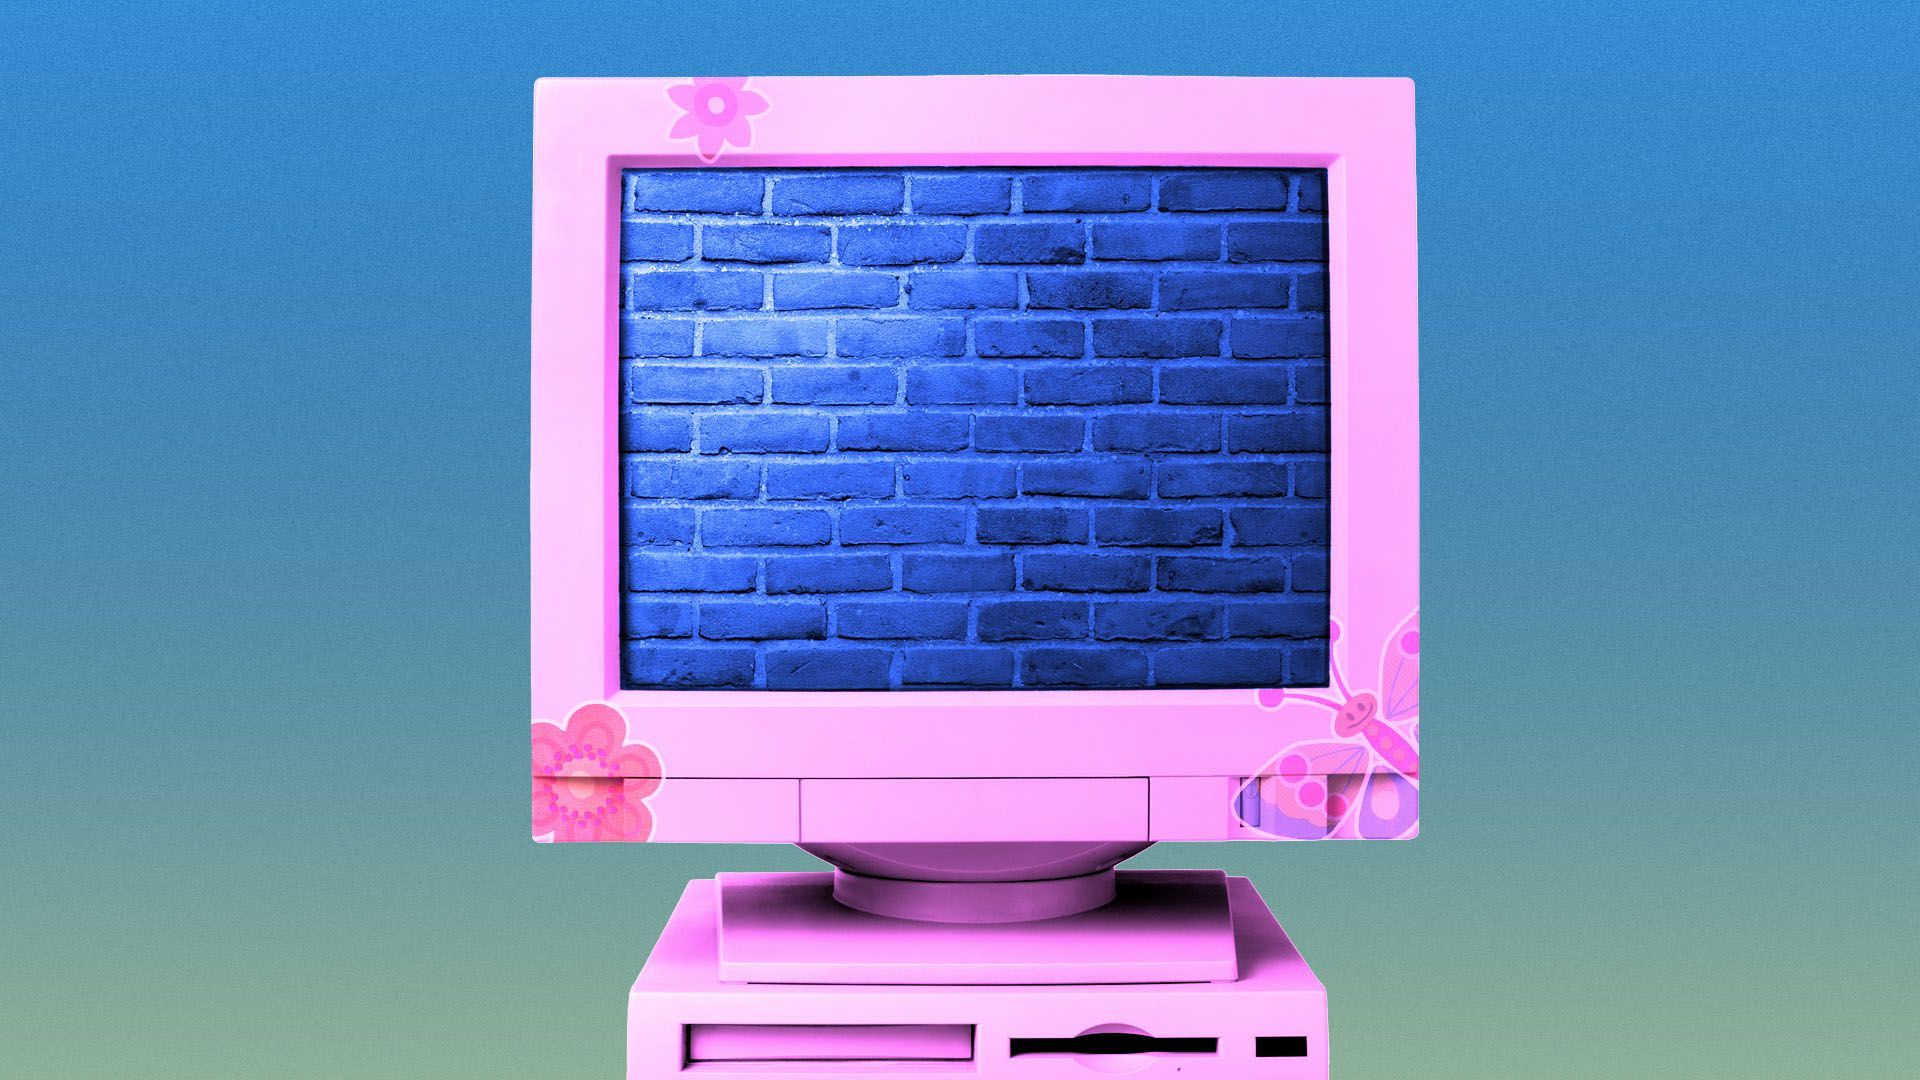 Illustration of a computer covered in stickers with a brick wall on the screen